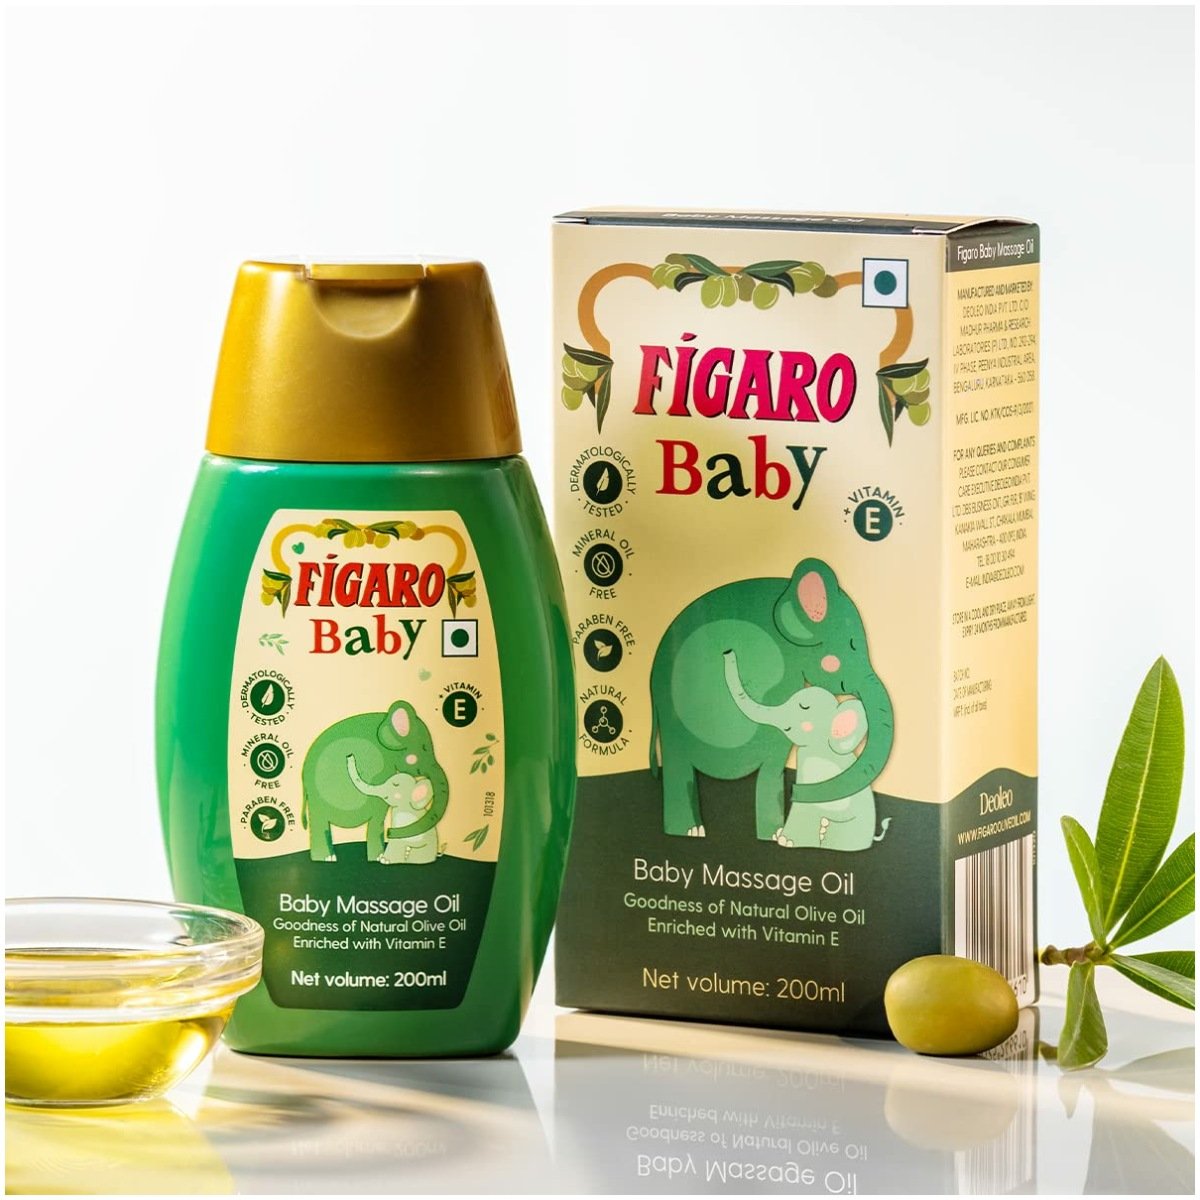 Figaro Baby Massage Oil with Goodness of Natural Olive oil enriched with vitamin E, Dermatologically tested, 200 ml